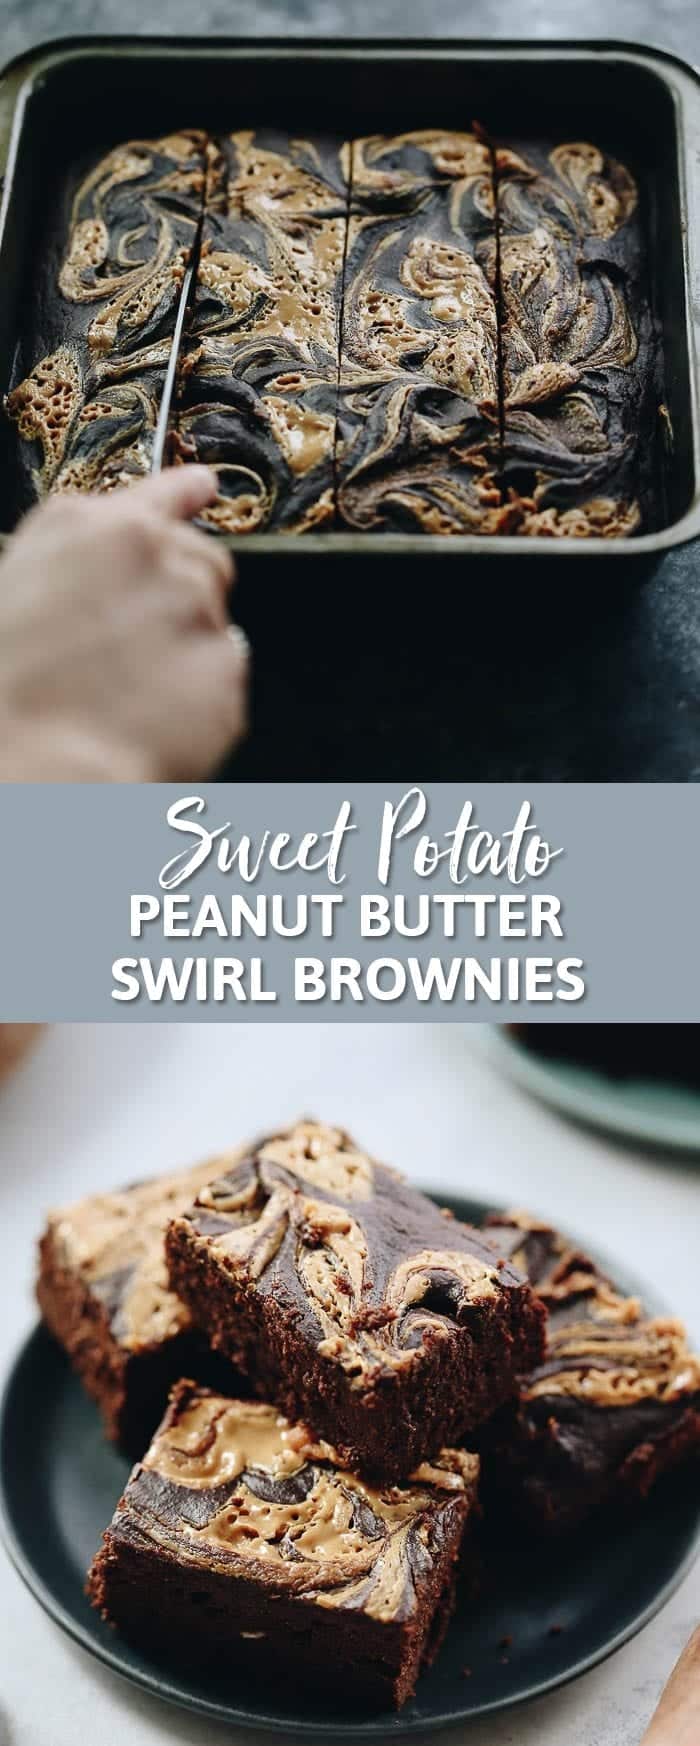 Your dessert just got a serious upgrade with these sweet potato peanut butter swirl brownies! Naturally sweetened with sweet potato and perfectly paired with peanut butter, this sweet treat will up your dessert game ASAP.